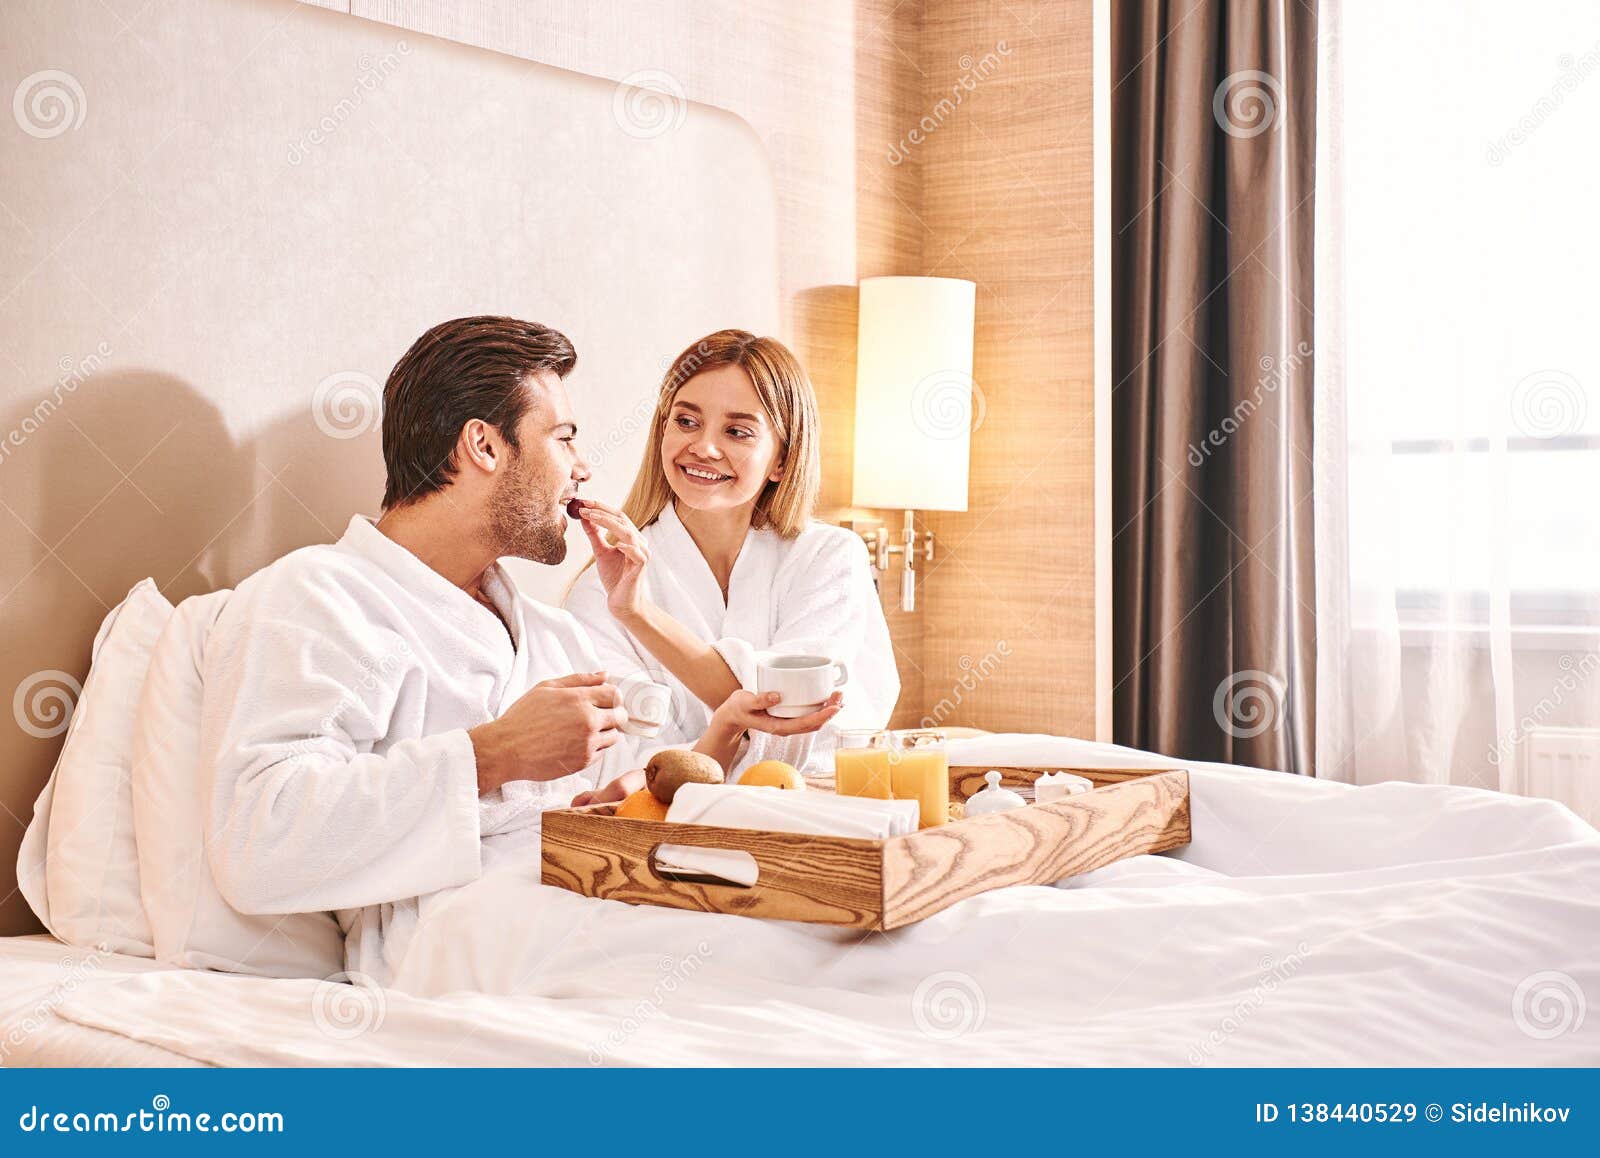 Feeding Each Other Couple Are Eating In Hotel Room Bed Stock Image